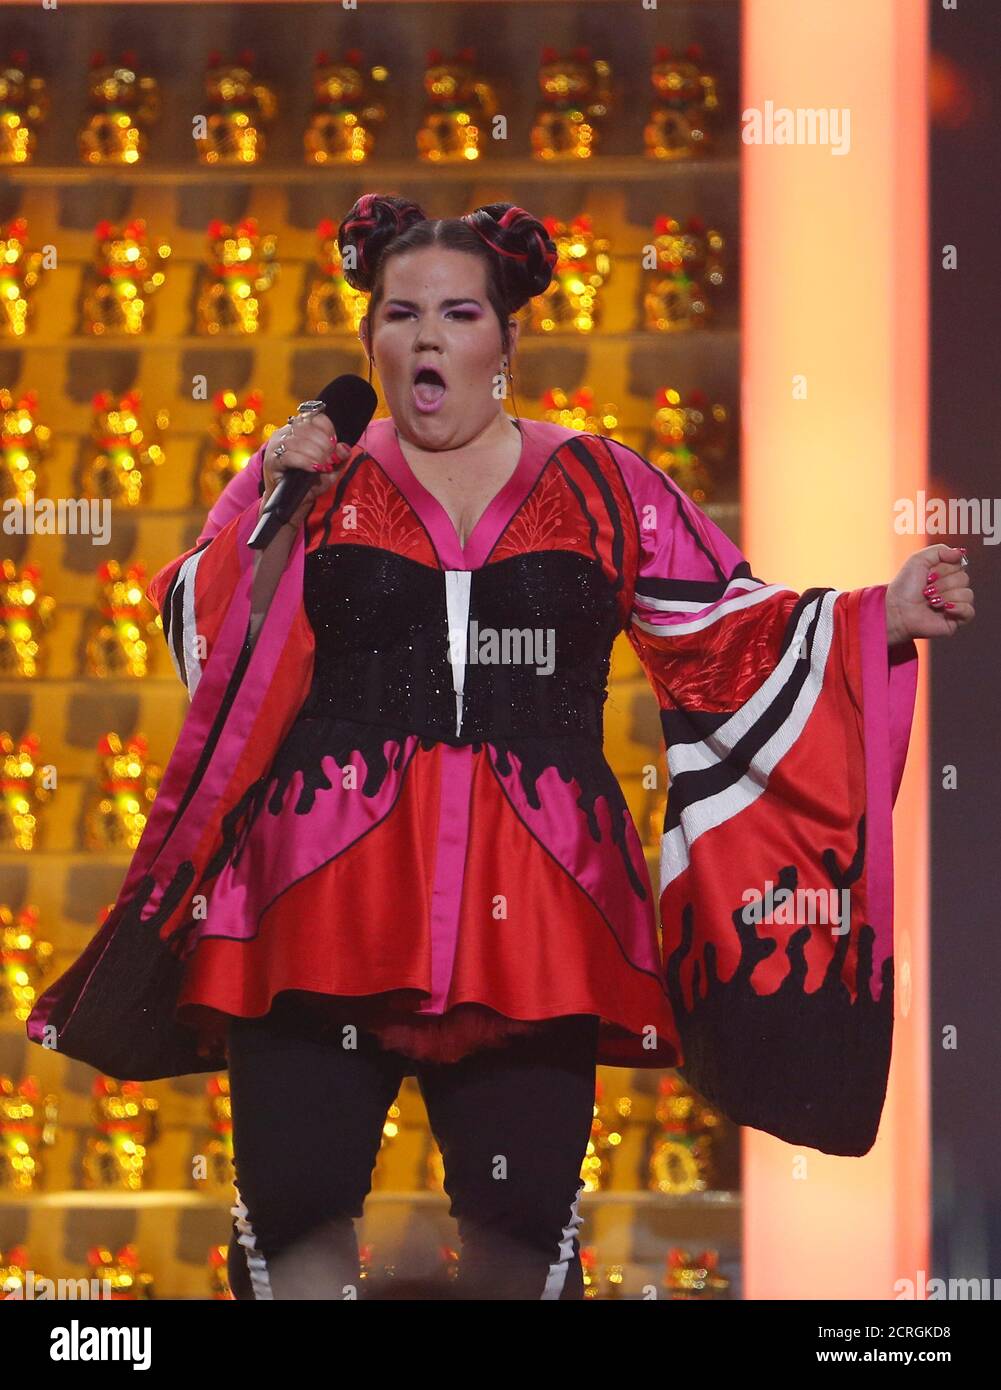 Israel's Netta performs "Toy" during the Grand Final of Eurovision Song  Contest 2018 at the Altice Arena hall in Lisbon, Portugal, May 12, 2018.  REUTERS/Pedro Nunes Stock Photo - Alamy